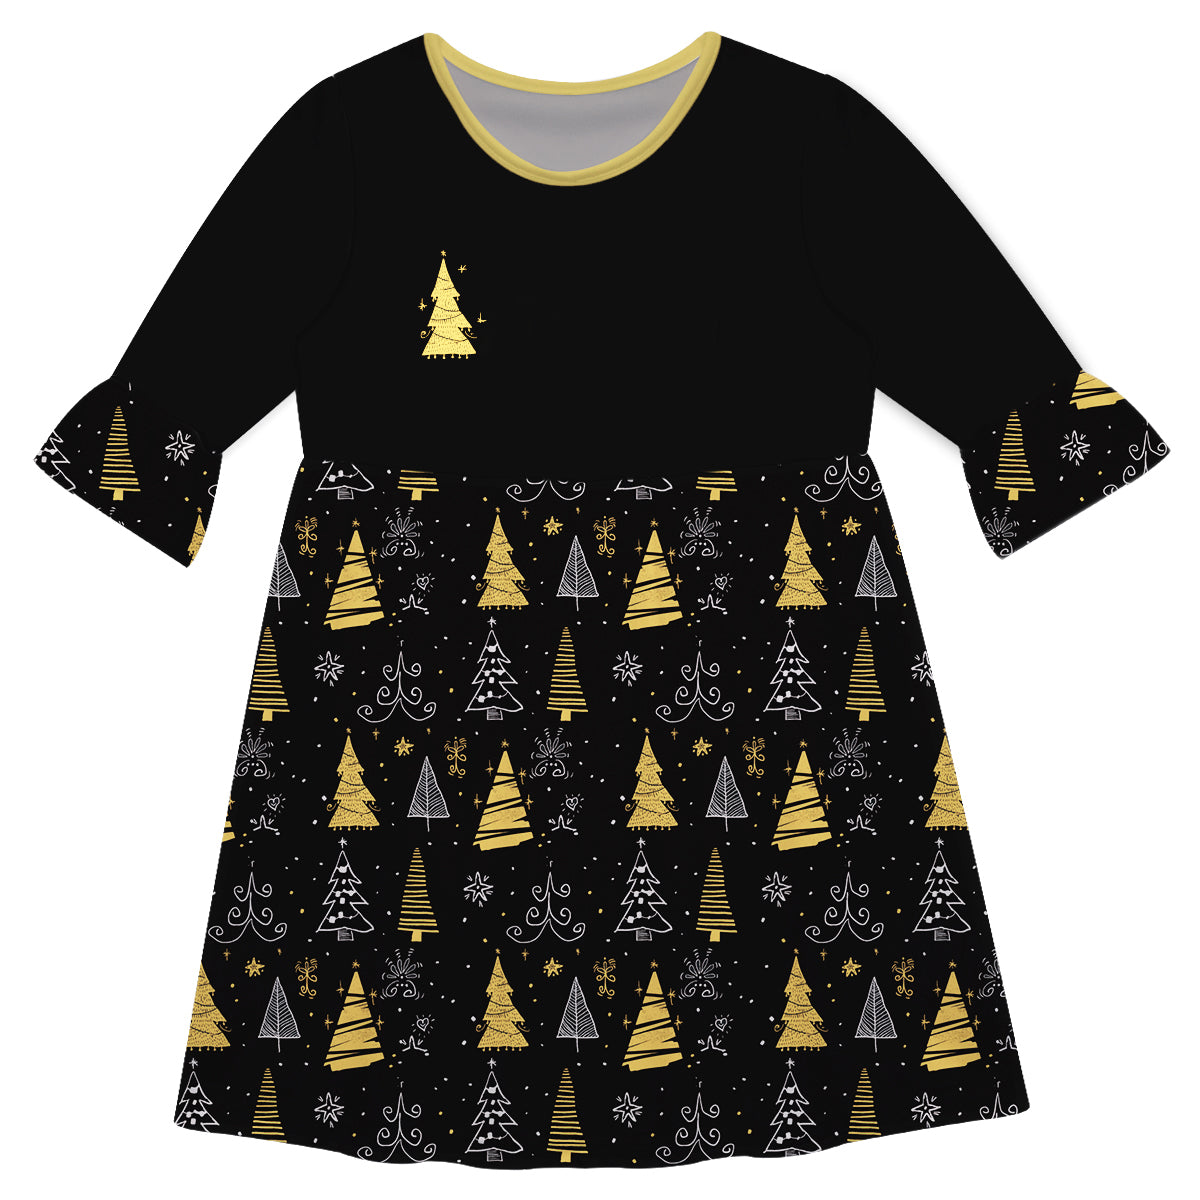 Girls black and yellow christmas tree dress with name - Wimziy&Co.